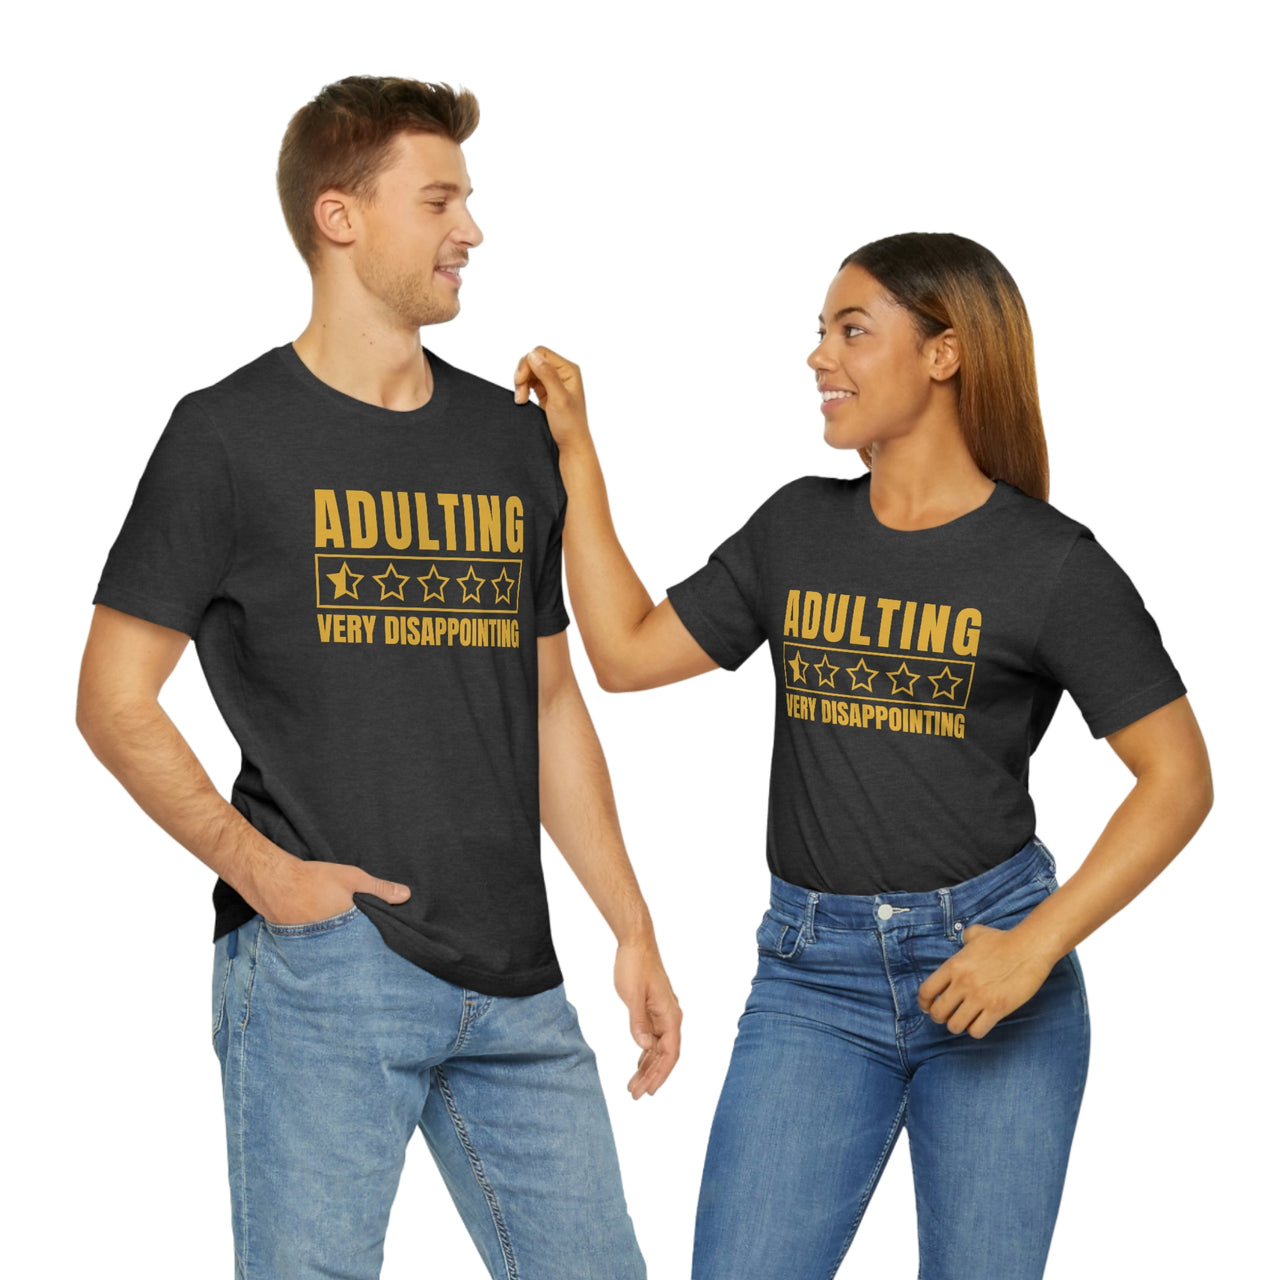 Adulthood T-Shirt - Adulting Very Disappointing